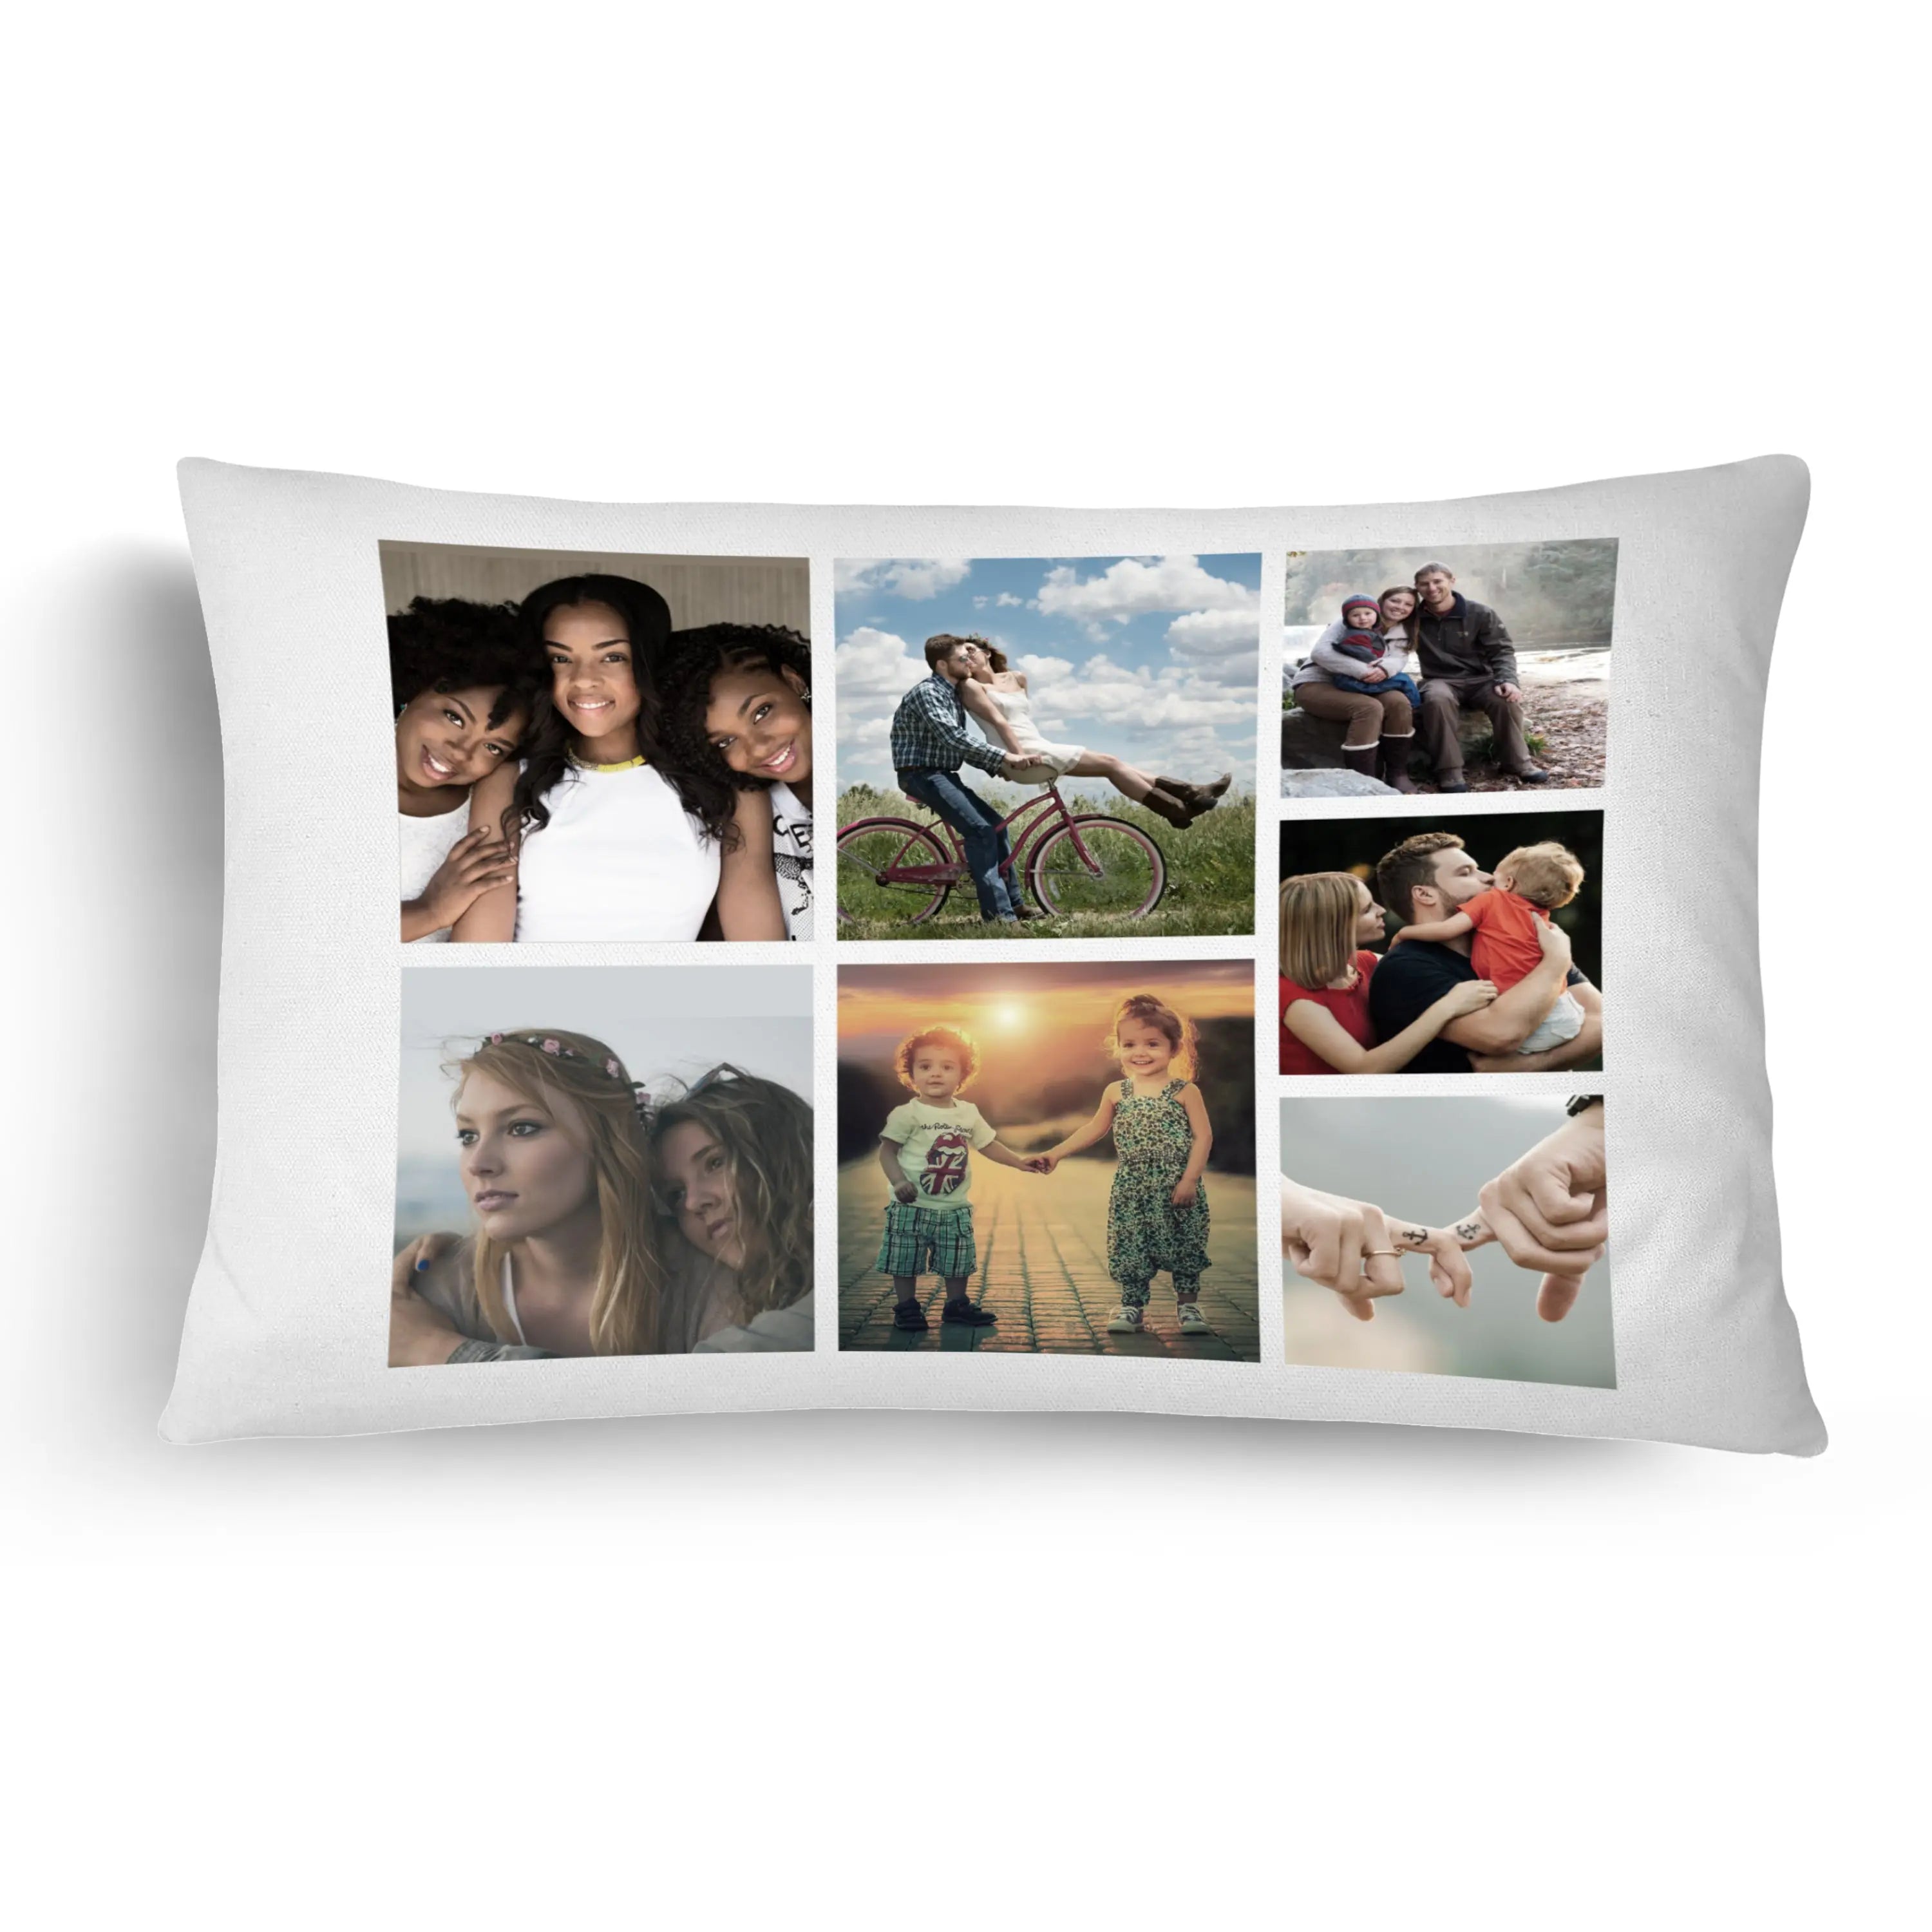 Personalised Photo Pillow case - 7 Images - Fully Customisable